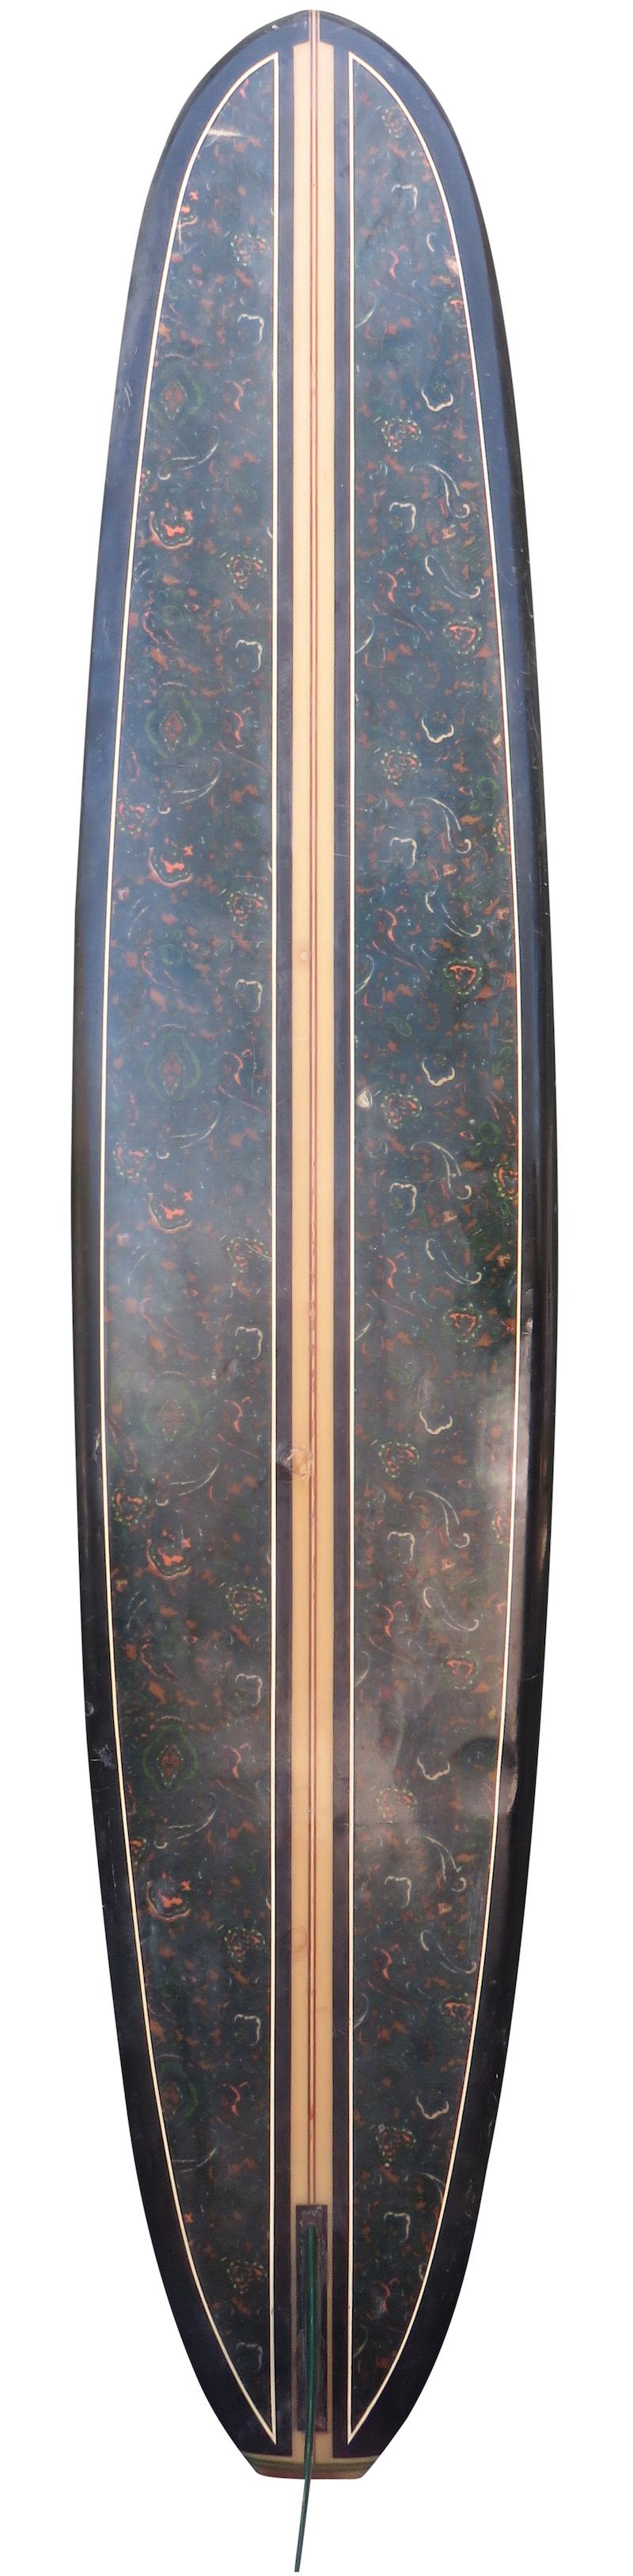 Late 1960s tamarack longboard surfboard. Features a balsa and redwood T-band stringer design with black rails and dark paisley pattern on bottom of board. A great example of a late 1960s vintage longboard surfboard made in California.